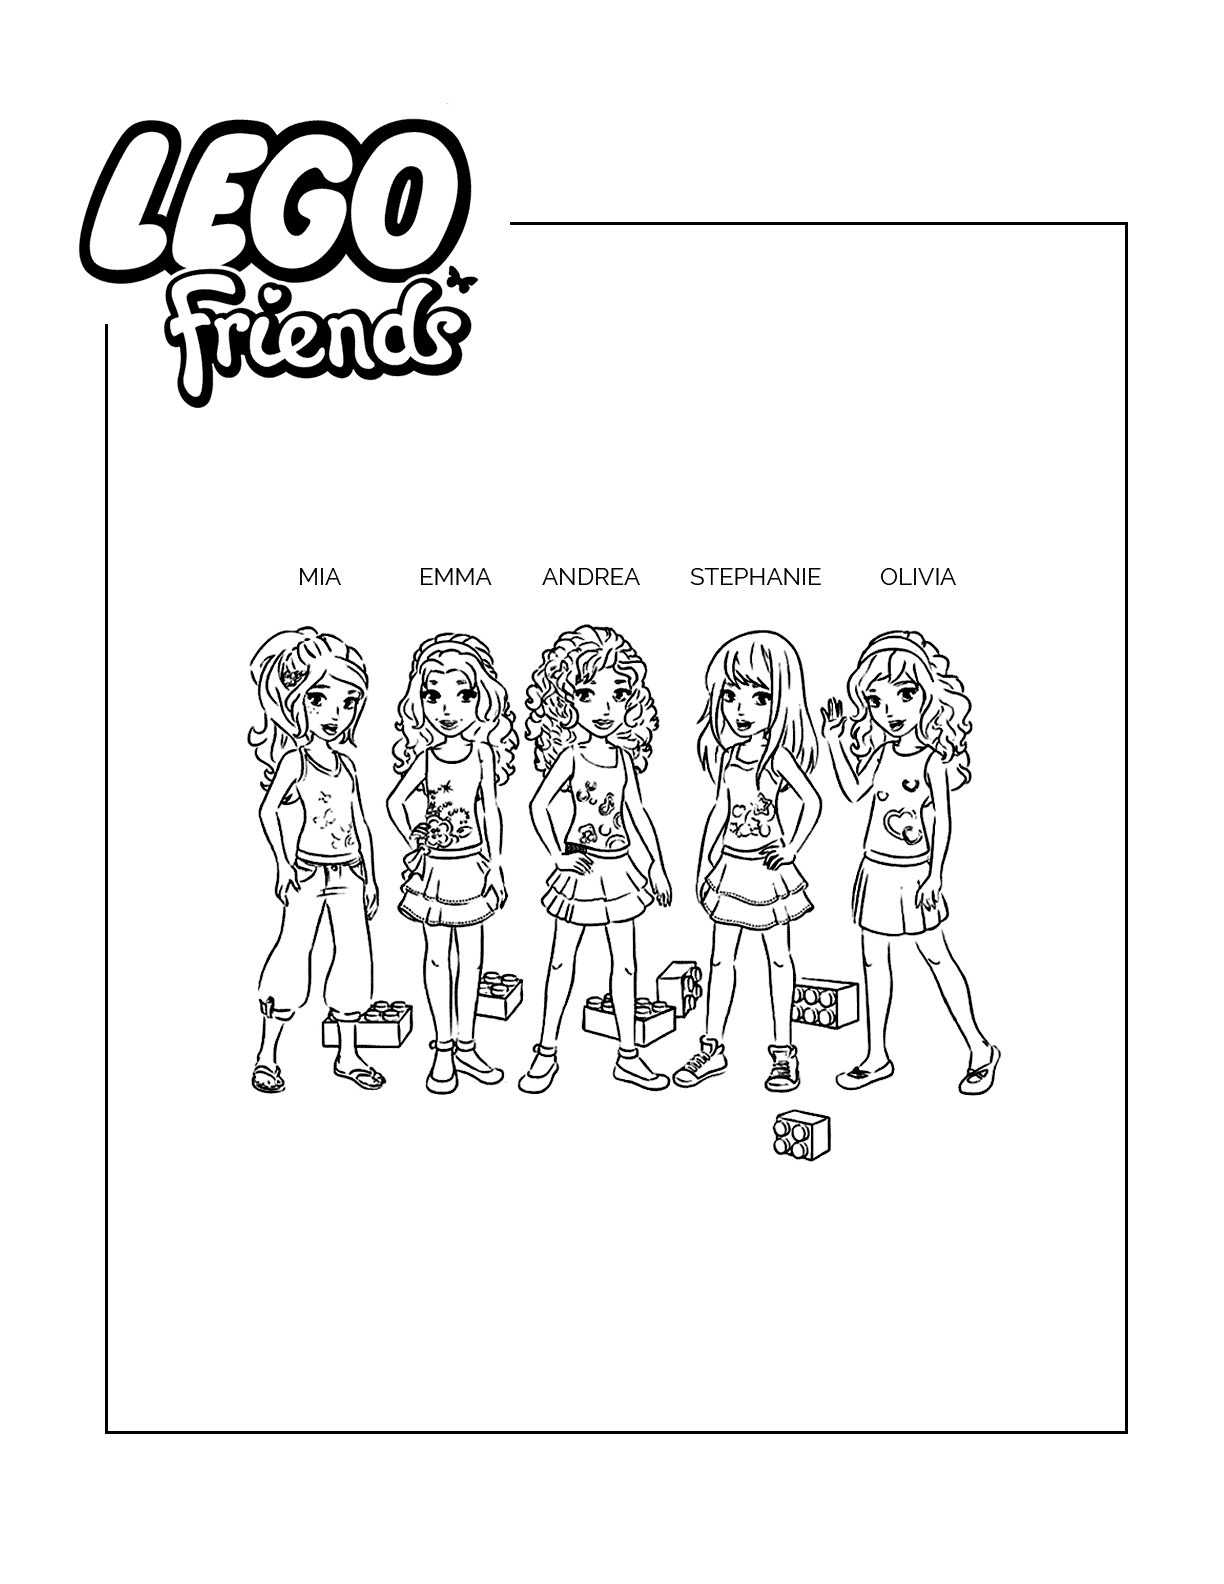 Lego Friends Characters Coloring Pages